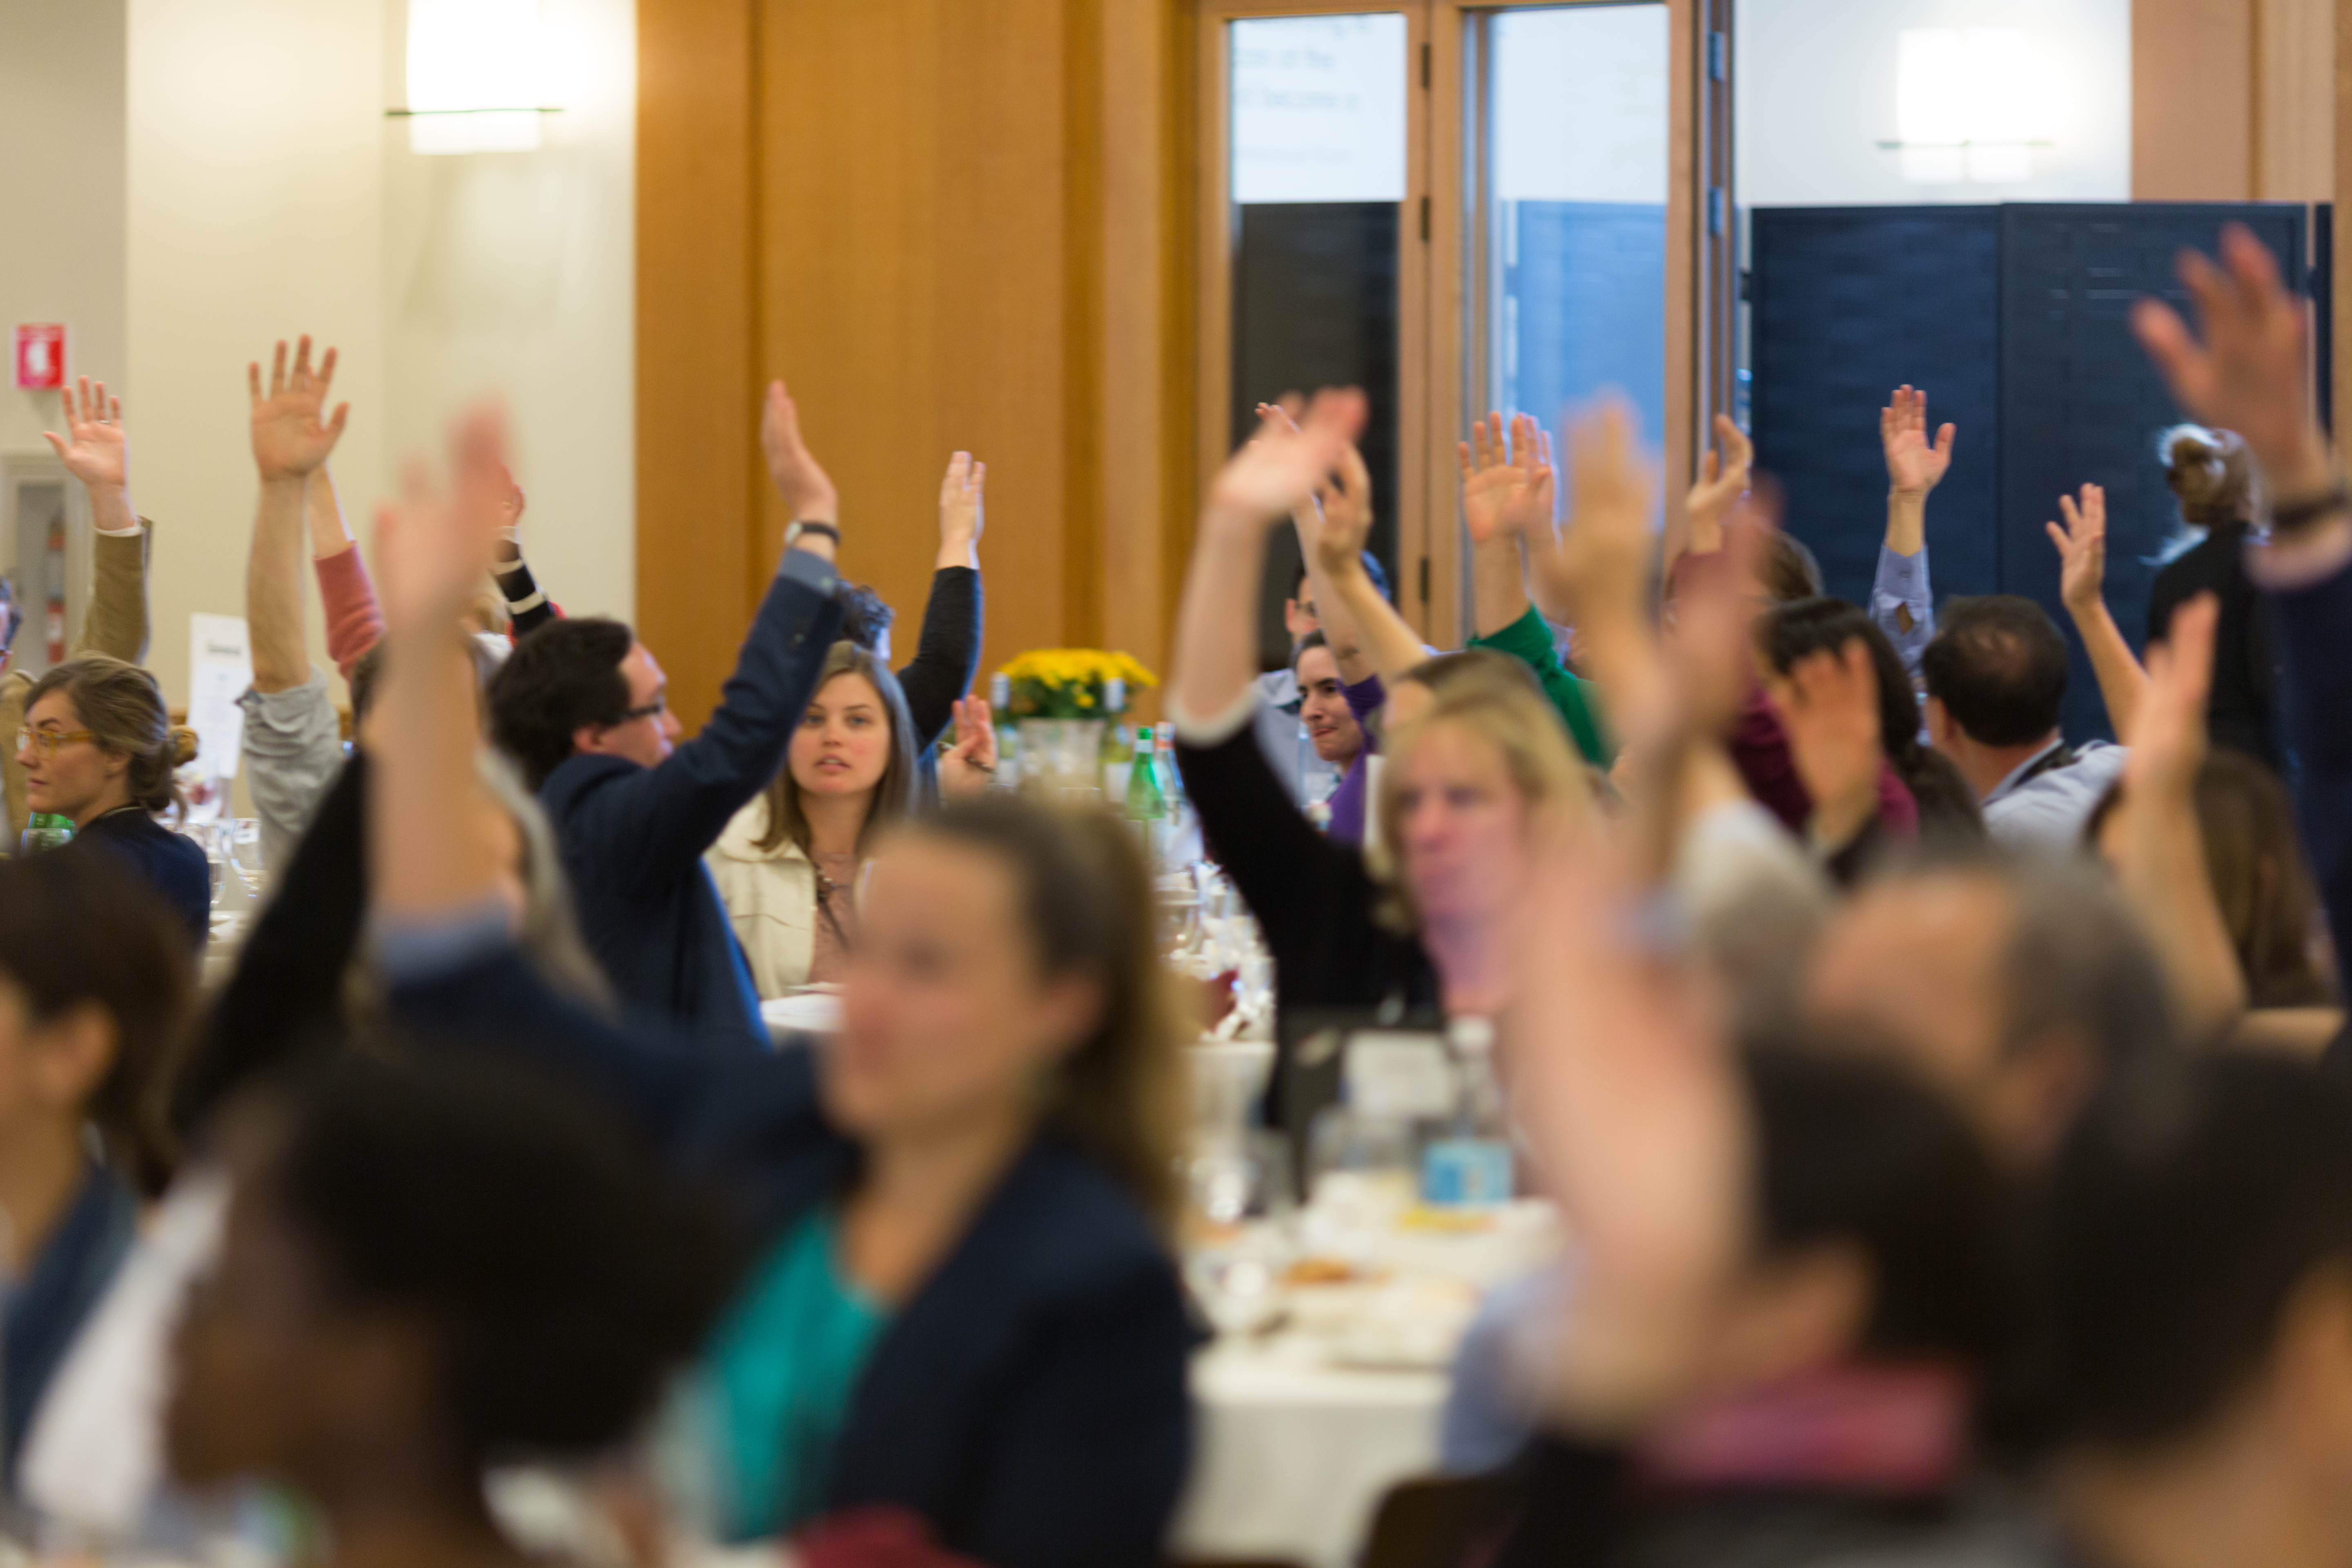 Conference attendees raise their hands during morning plenary activity